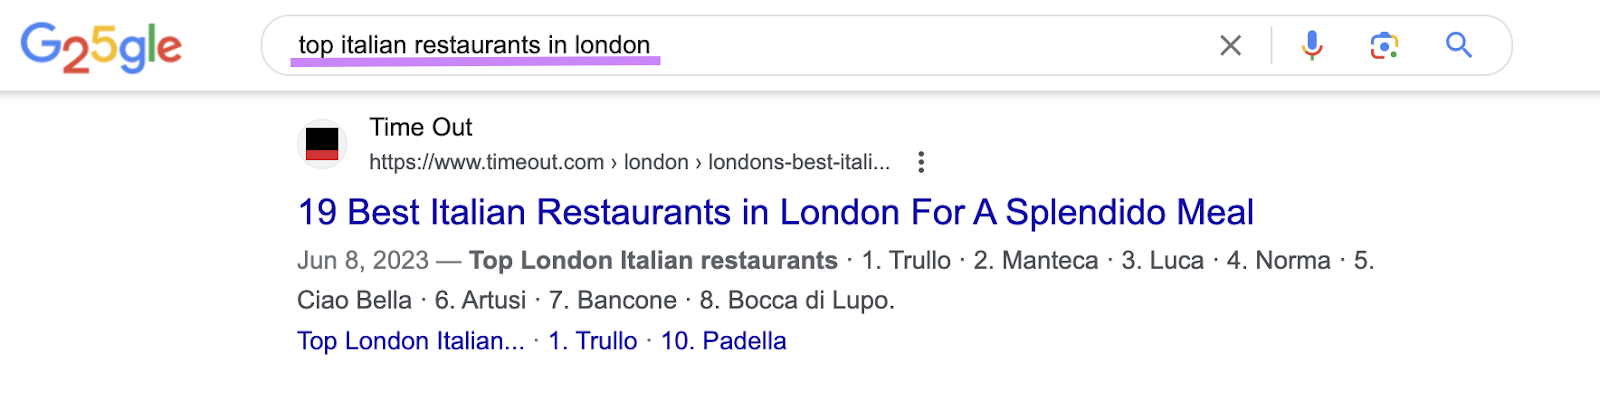 Time Out listicle comes as first Google result for “top Italian restaurants in London”